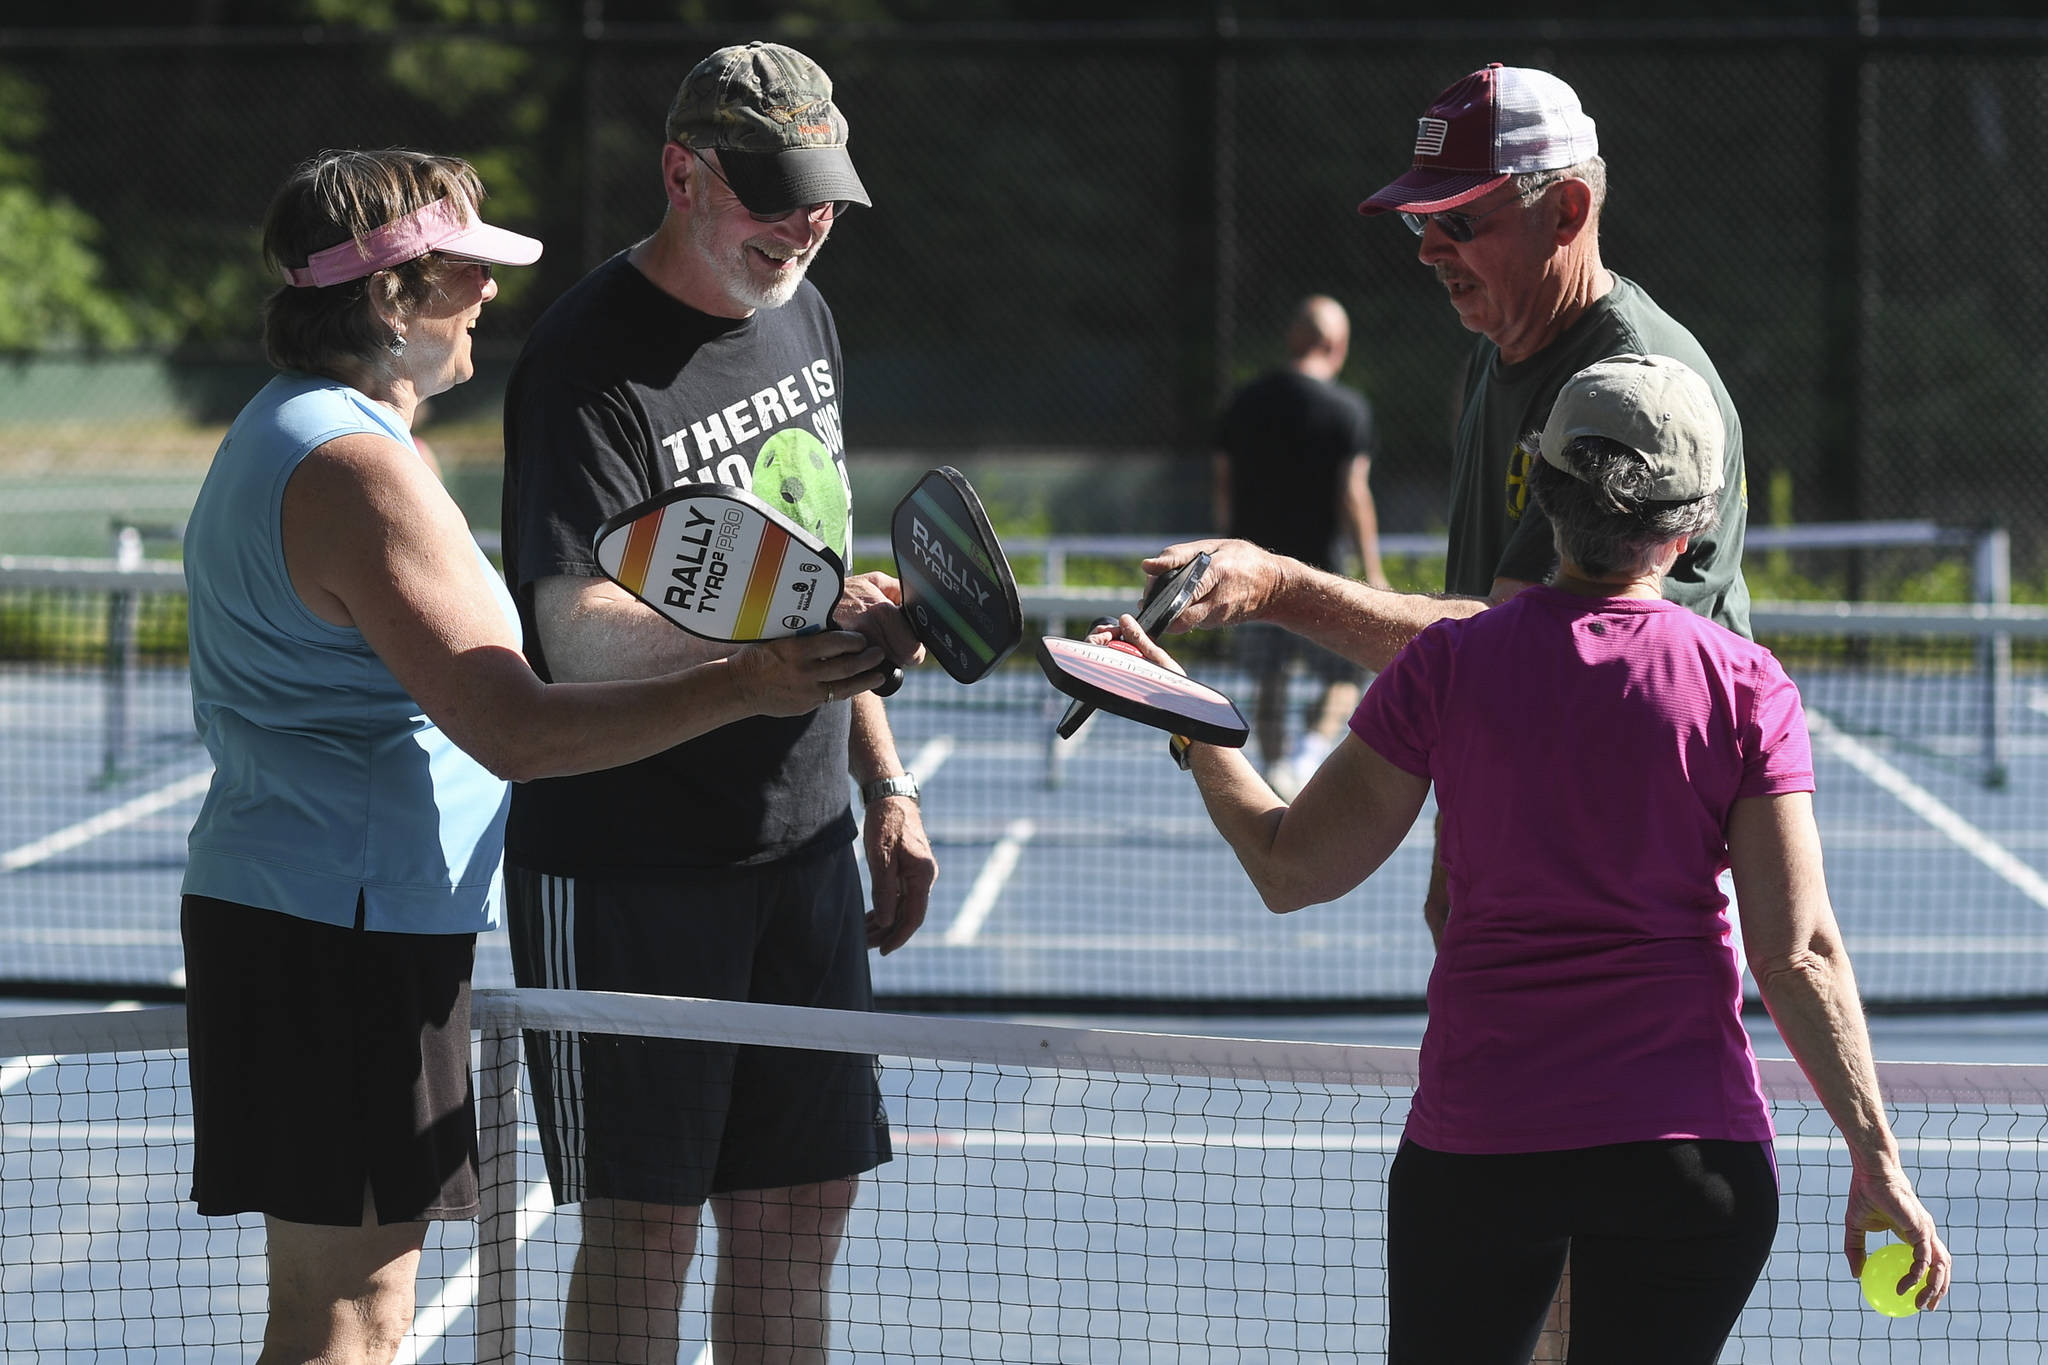 Pickleball players touch paddles after a match instead of giving handshakes at the Cope Park tennis courts on Wednesday, June 26, 2019. (Michael Penn | Juneau Empire)